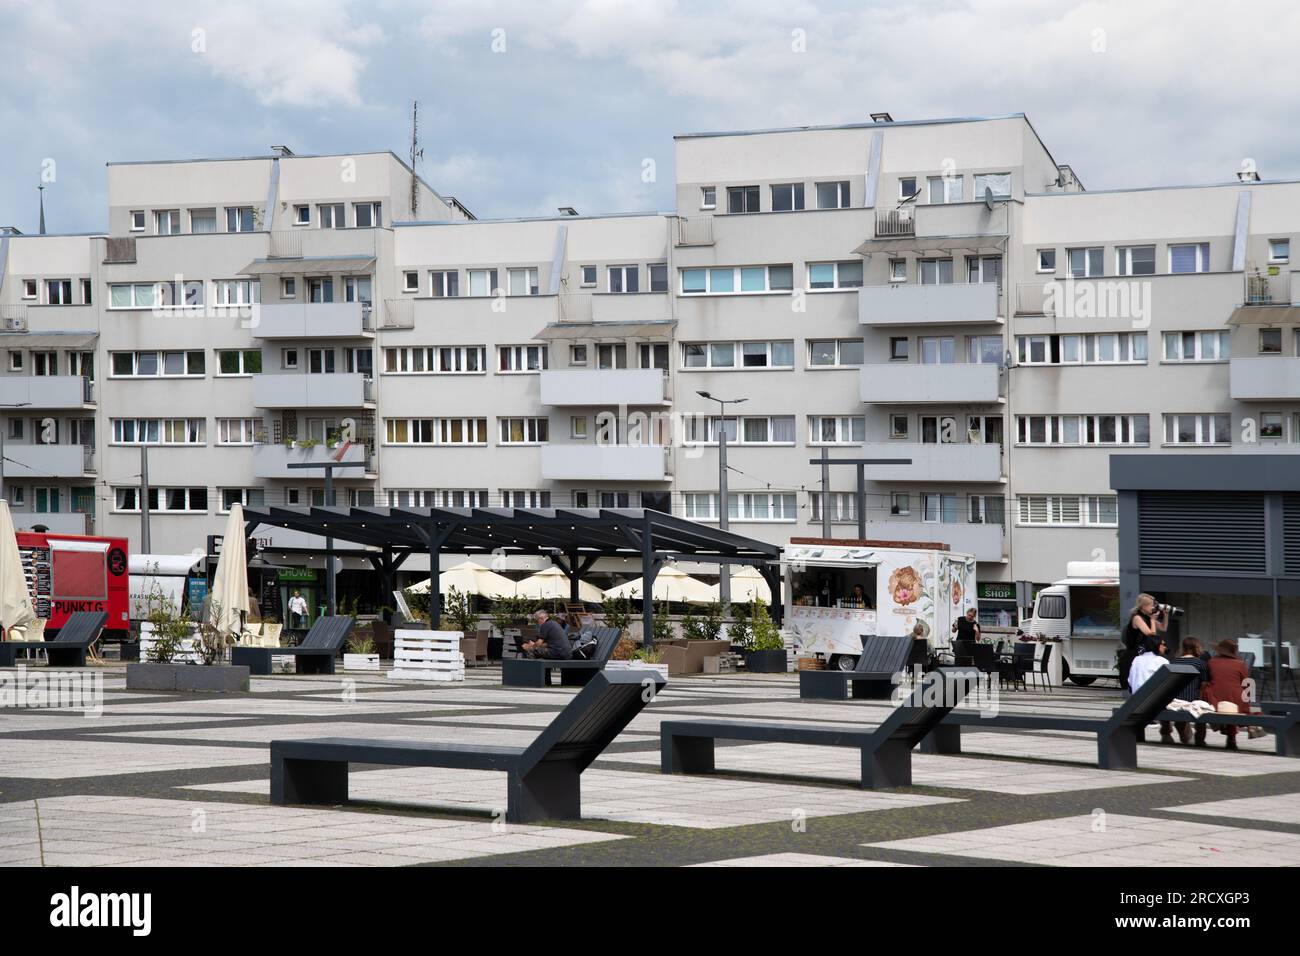 Plac Nowy Targ, with apartments in background Stock Photo